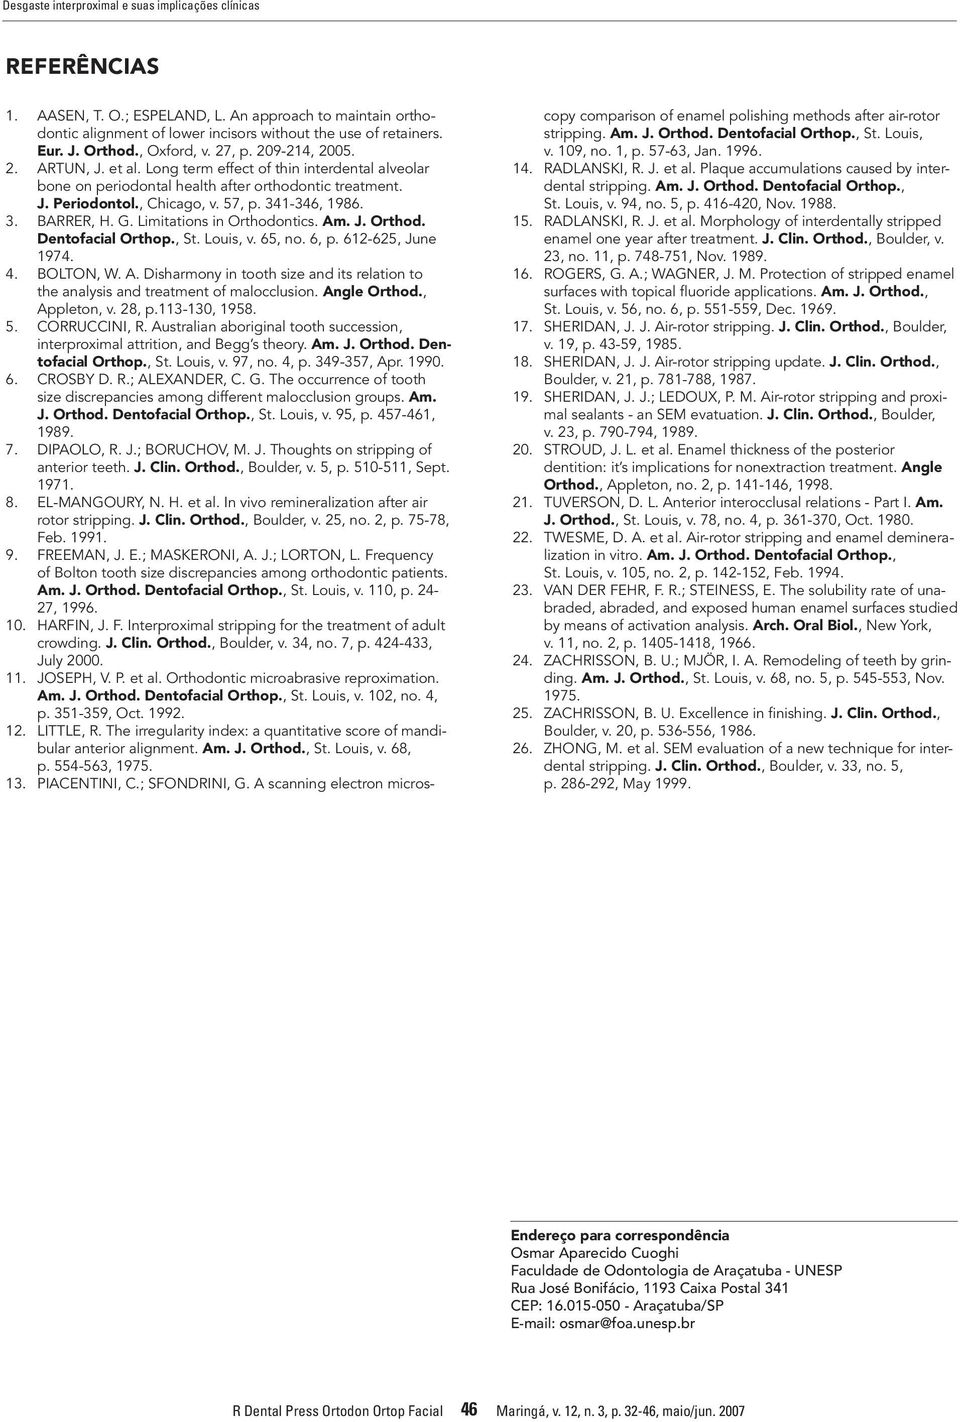 341-346, 1986. 3. BARRER, H. G. Limitations in Orthodontics. Am. J. Orthod. Dentofacial Orthop., St. Louis, v. 65, no. 6, p. 612-625, June 1974. 4. BOLTON, W. A. Disharmony in tooth size and its relation to the analysis and treatment of malocclusion.